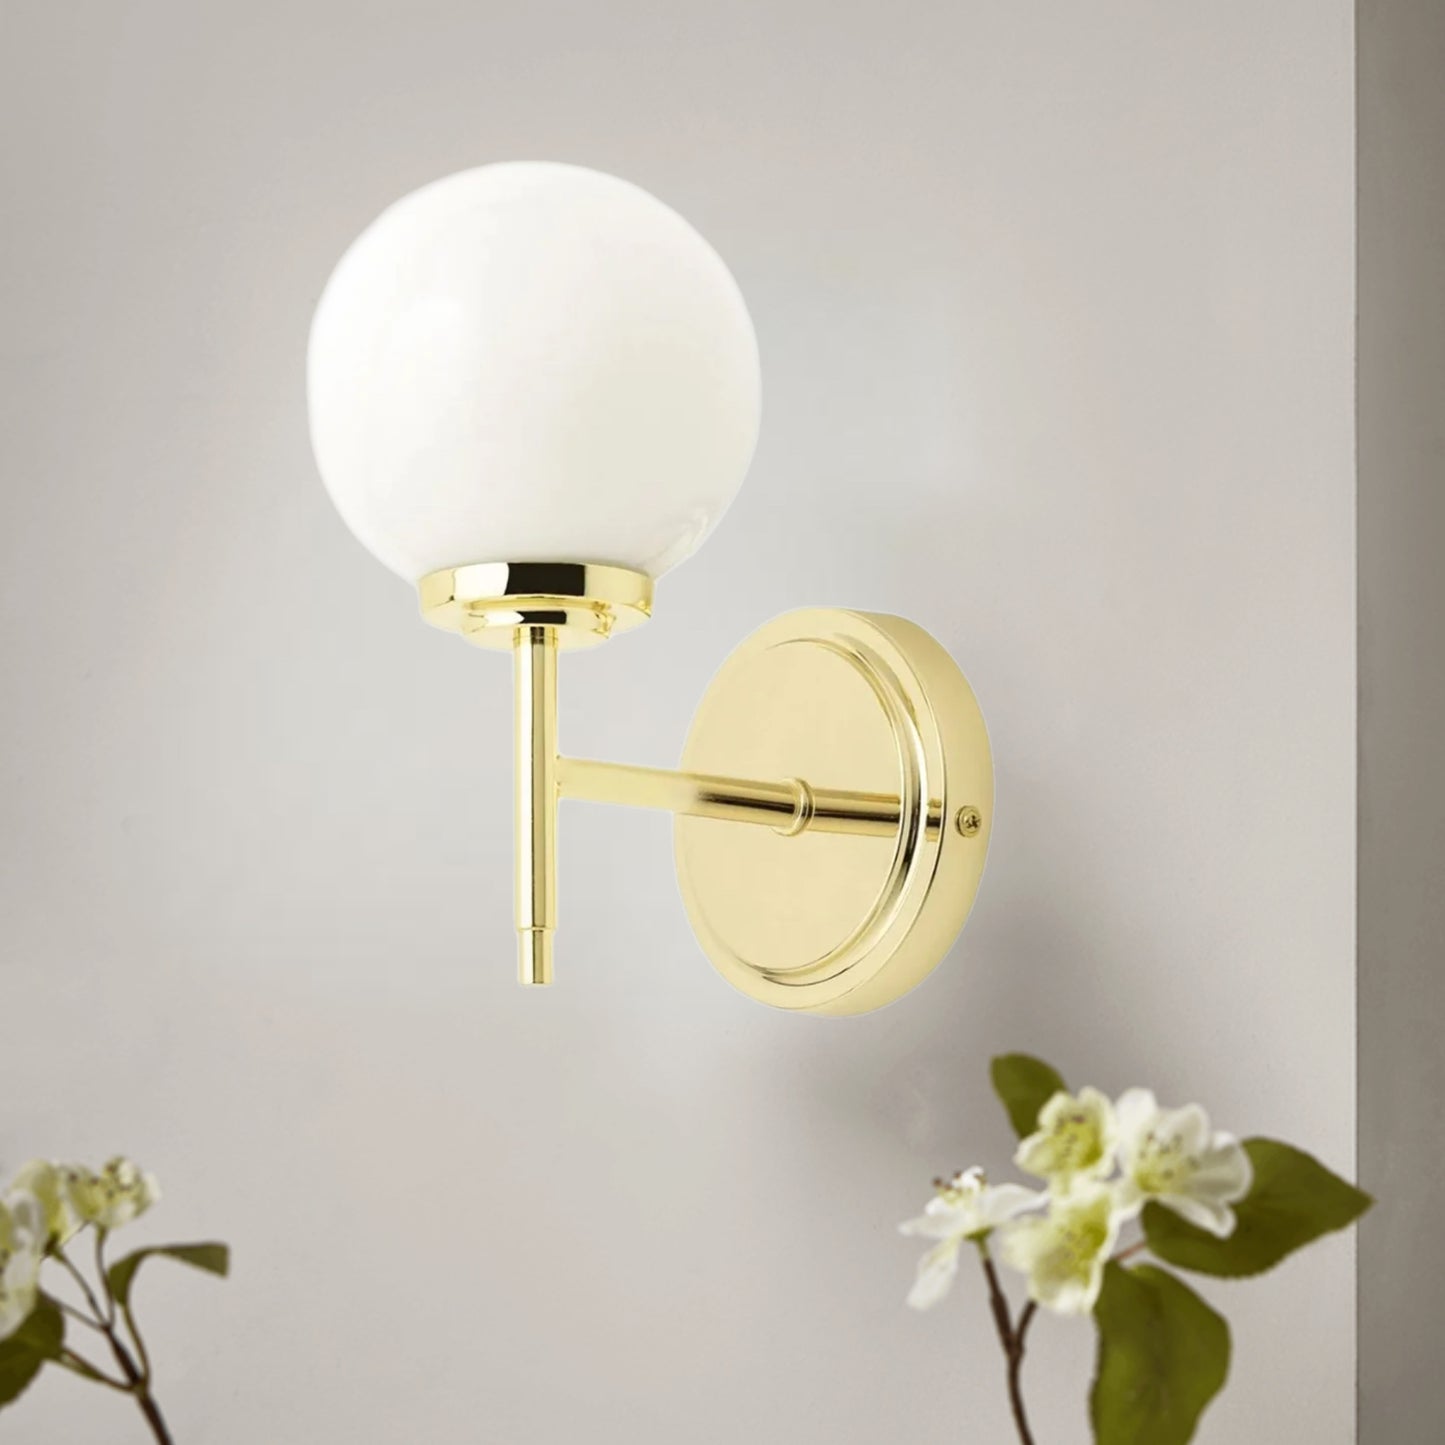 Our Marley globe armed wall light is a stylish light fitting ideal for the modern home and can be used in the bathroom. It features a brass effect round ceiling plate and a globe opal glass shade mounted on a brass arm.